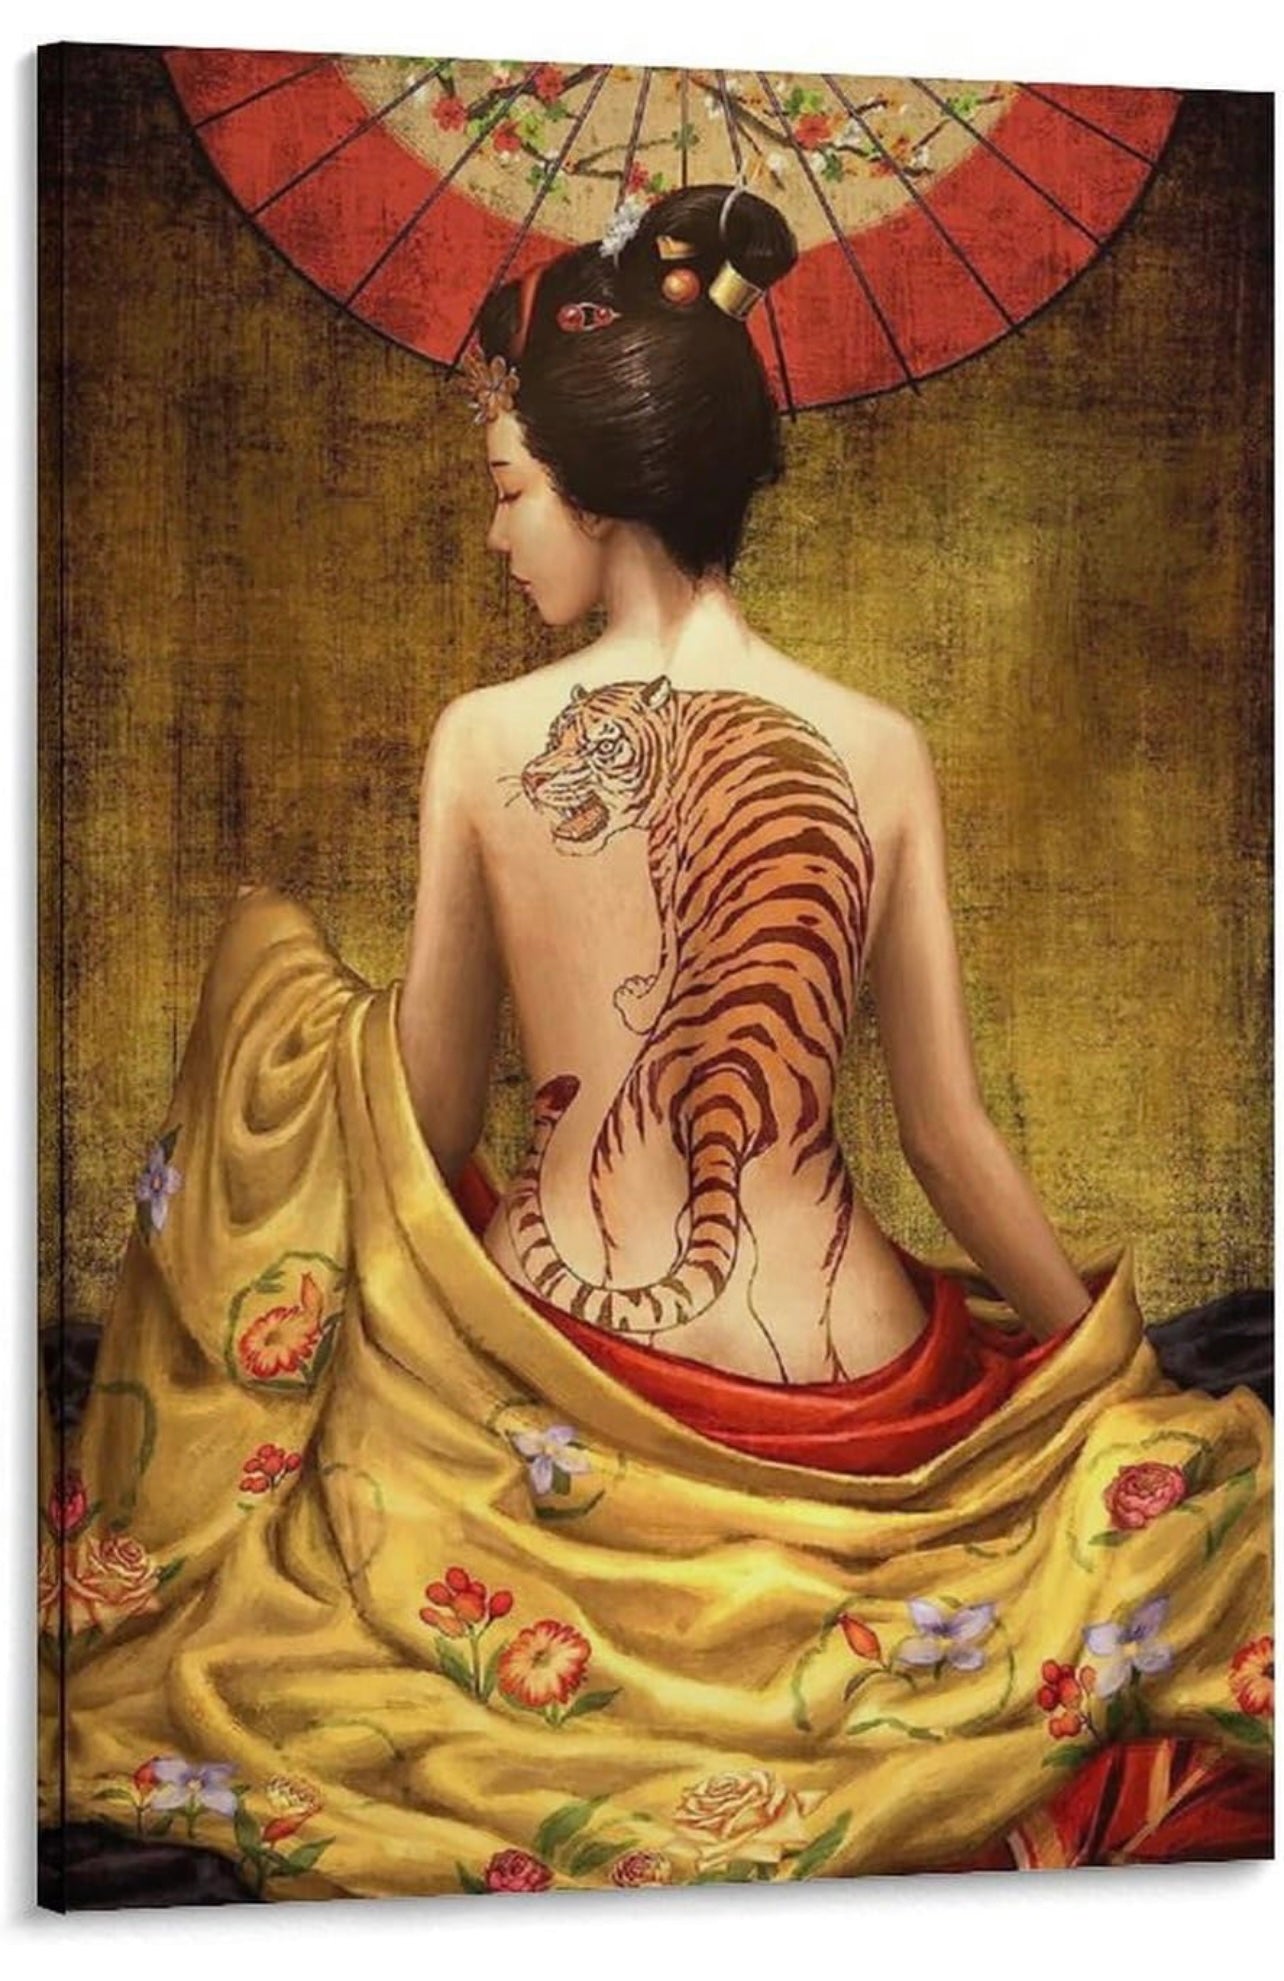 Japanese Woman Canvas Art Tiger Tattoo Painting Pictures Vintage Prints Canvas Wall Art Prints for Wall Decor Room Decor Bedroom Decor Gifts 24x36inch(60x90cm) Frame-Style